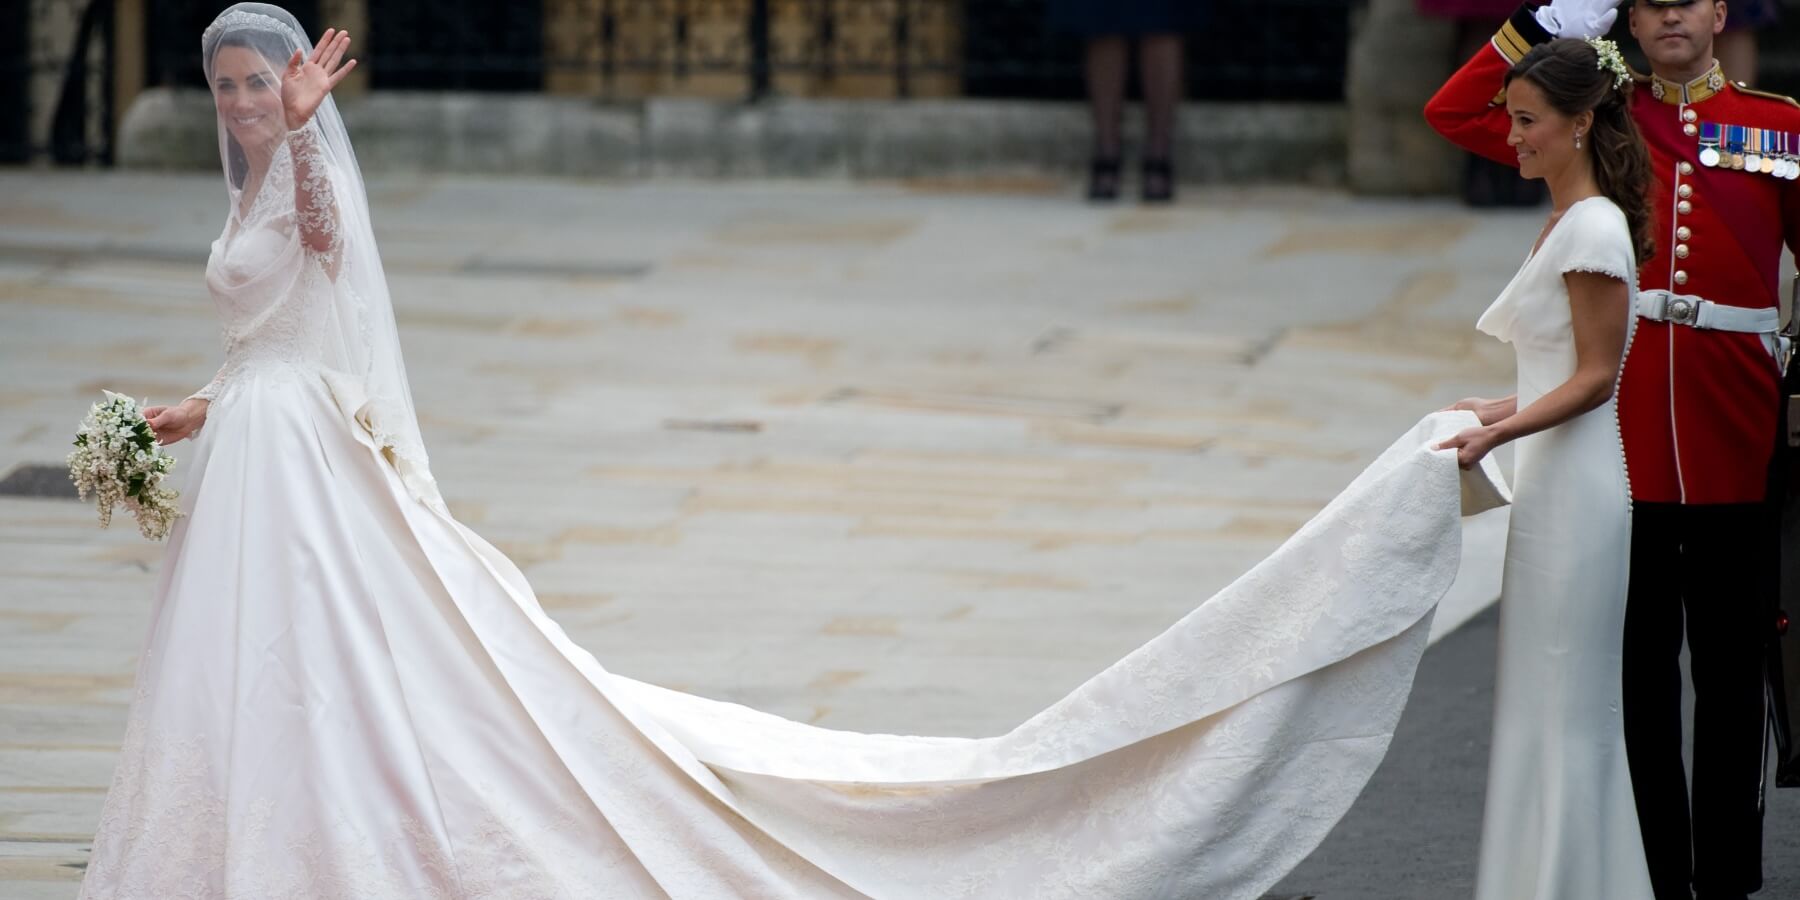 Kate Middleton and Pippa Middleton photographed at the royal wedding of 2011 where Pippa's dress caused a commotion.